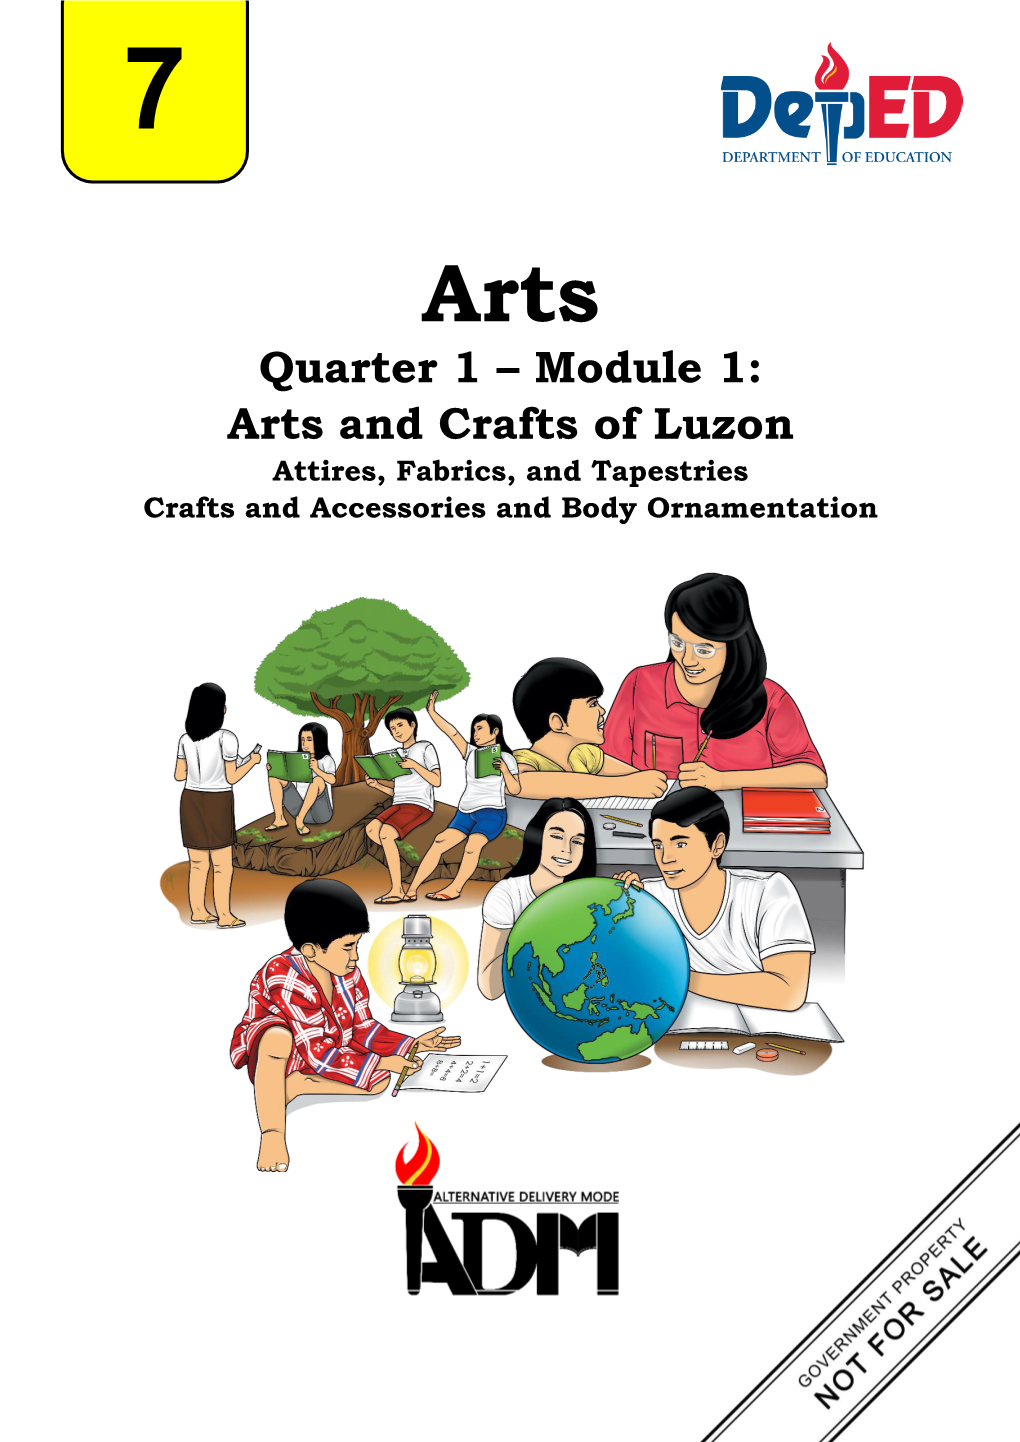 Arts and Crafts of Luzon Attires, Fabrics, and Tapestries Crafts and Accessories and Body Ornamentation